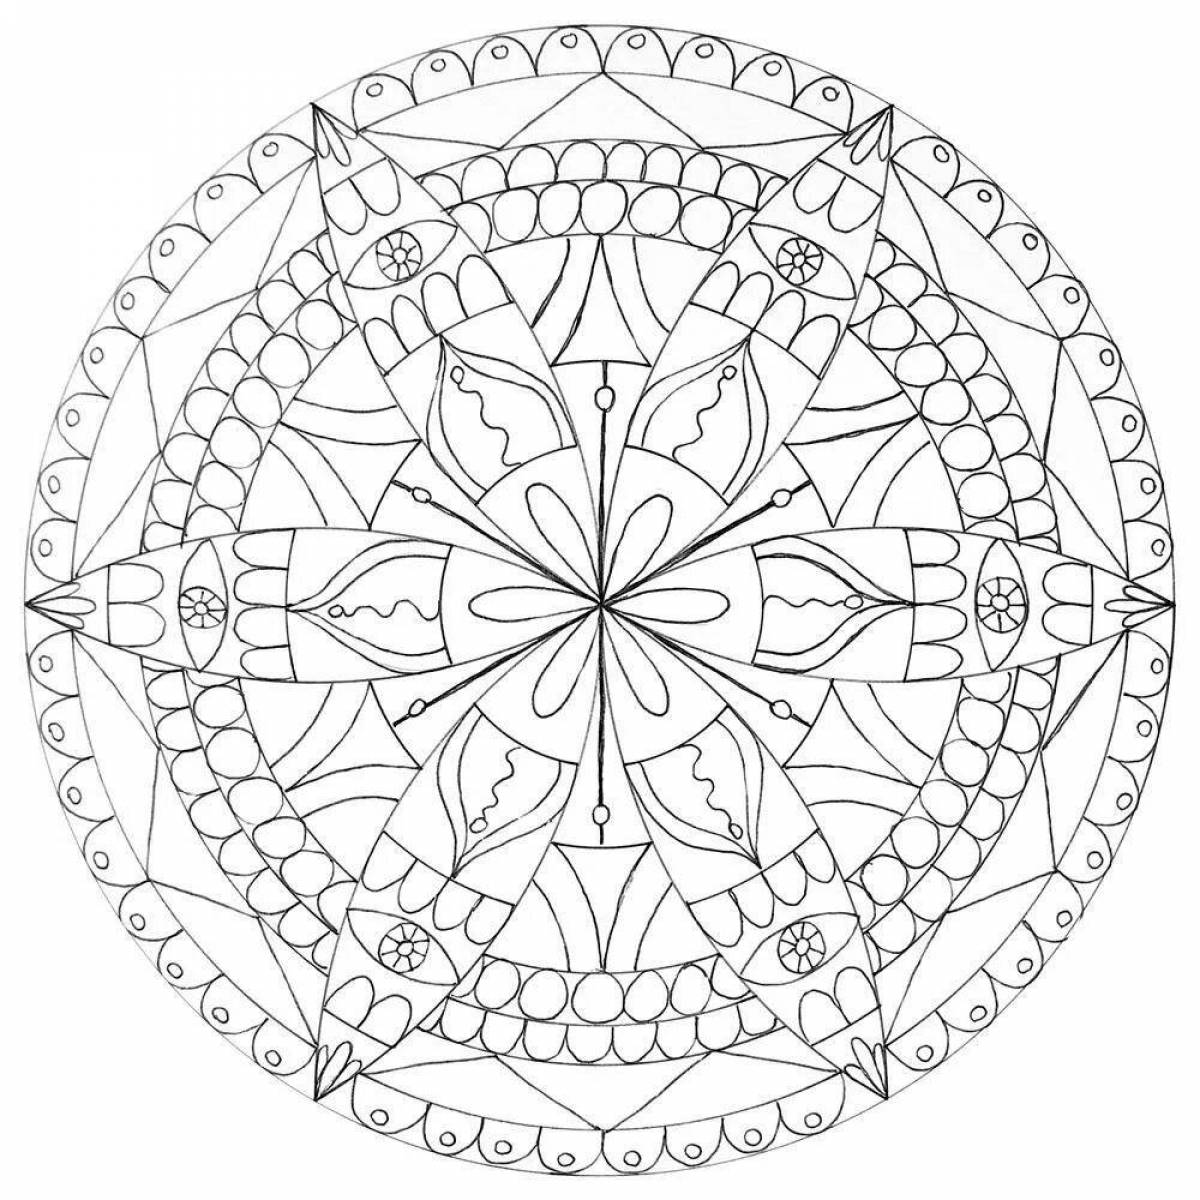 Mandala for good luck and success in everything #8